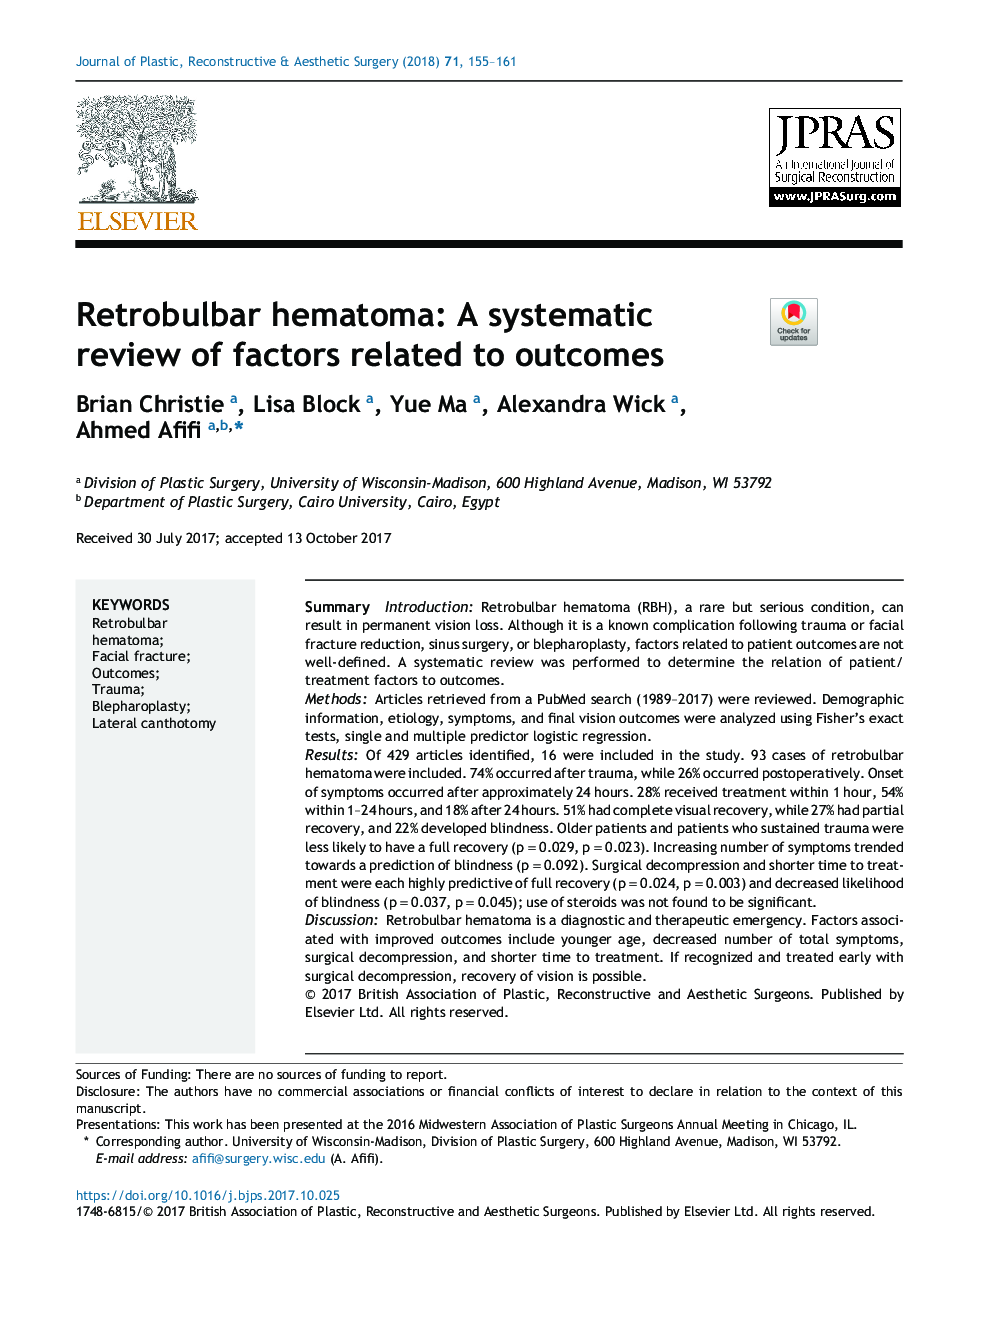 Retrobulbar hematoma: A systematic review of factors related to outcomes